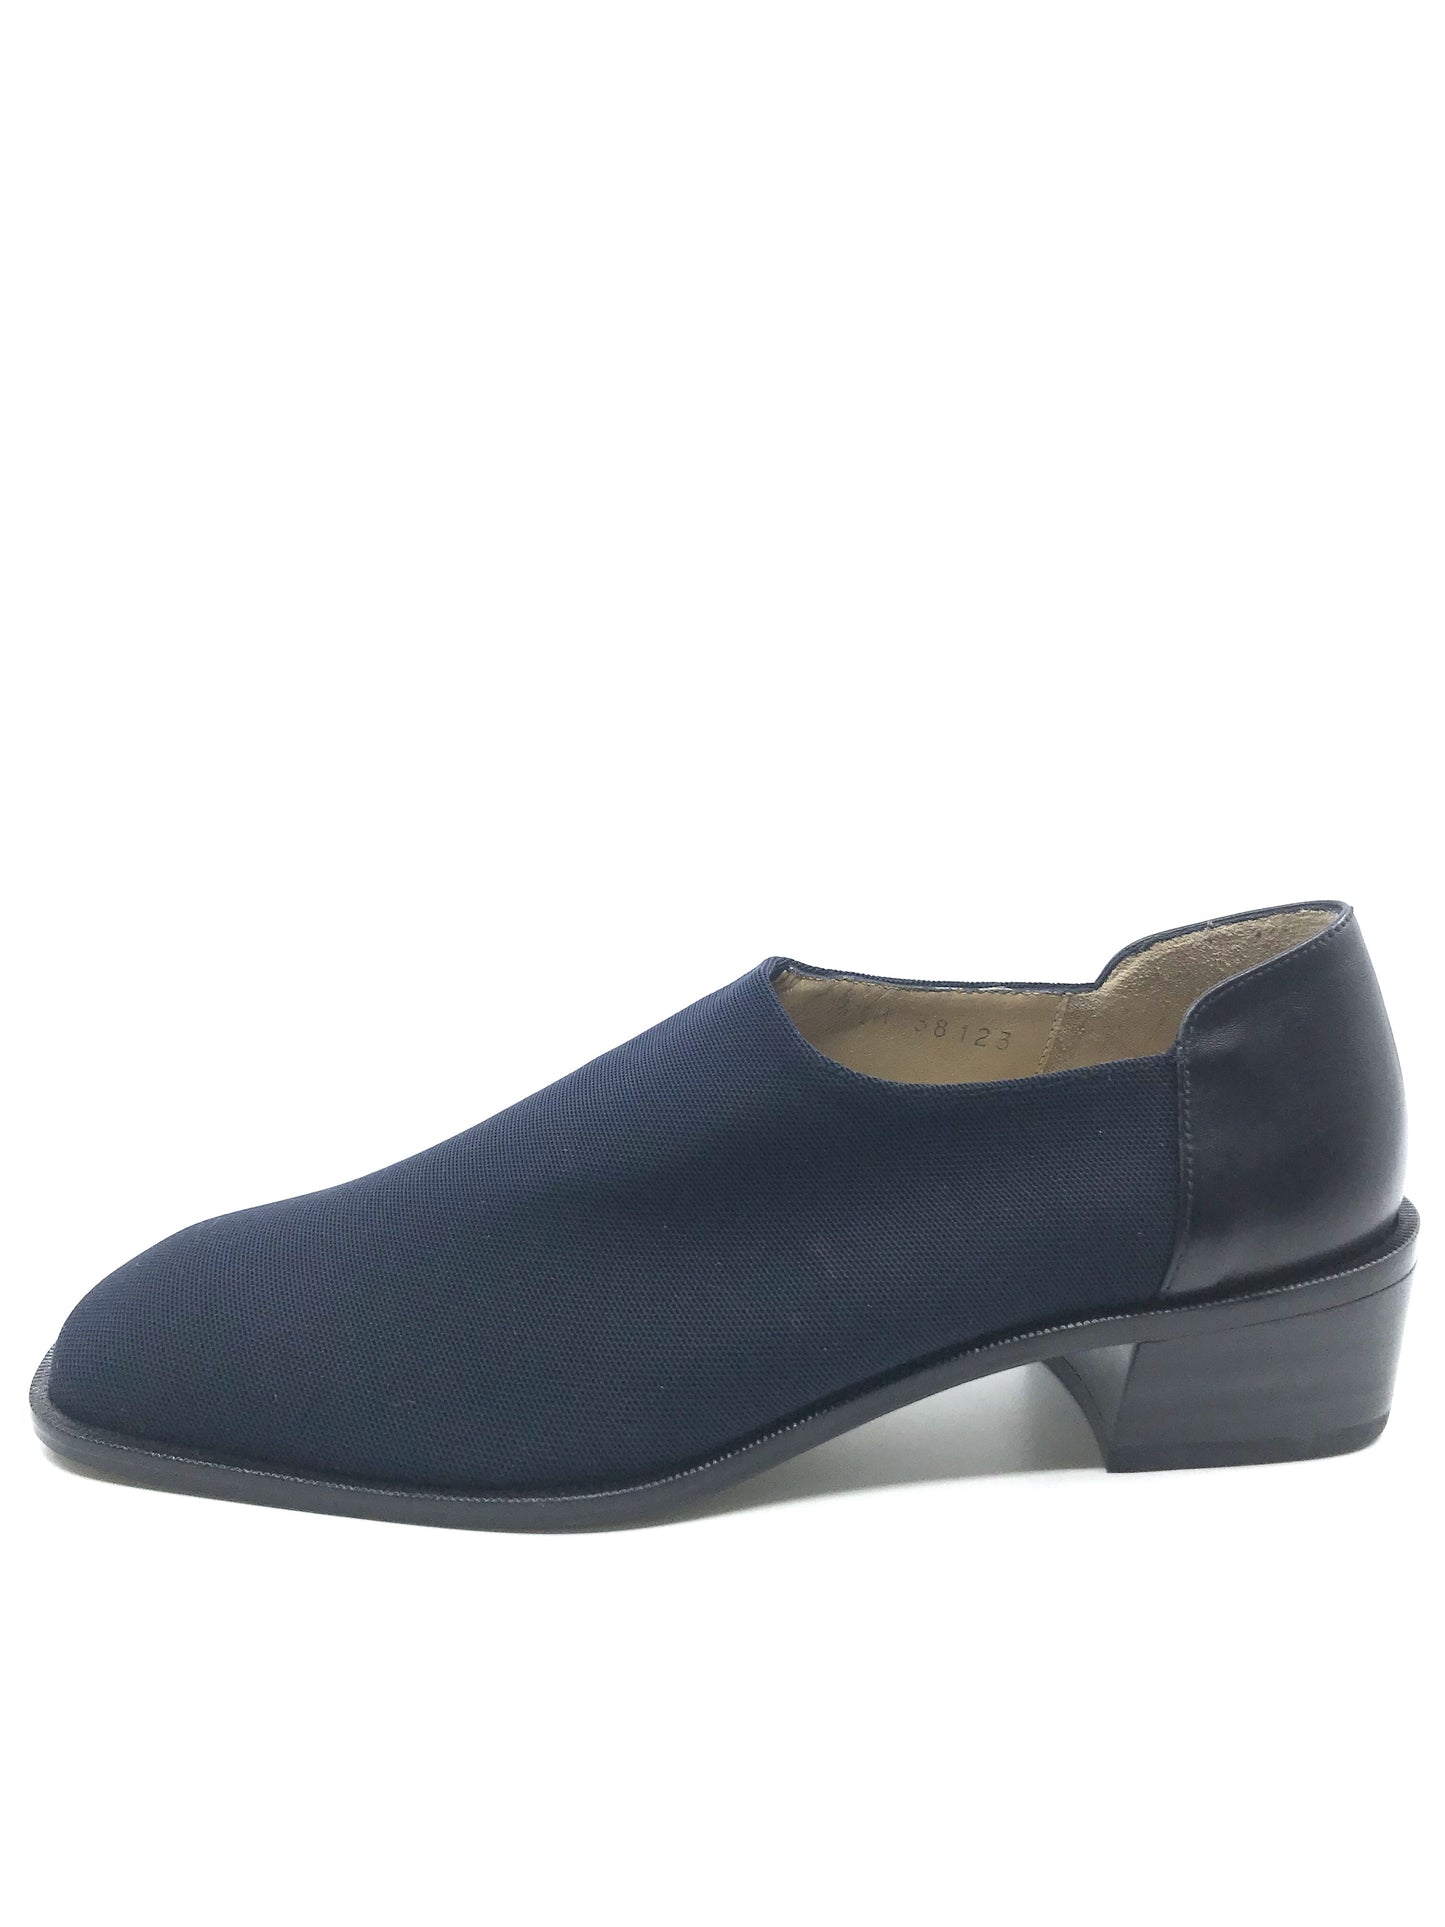 Love Navy Fabric and Leather Donald Pliner Loafer Pumps